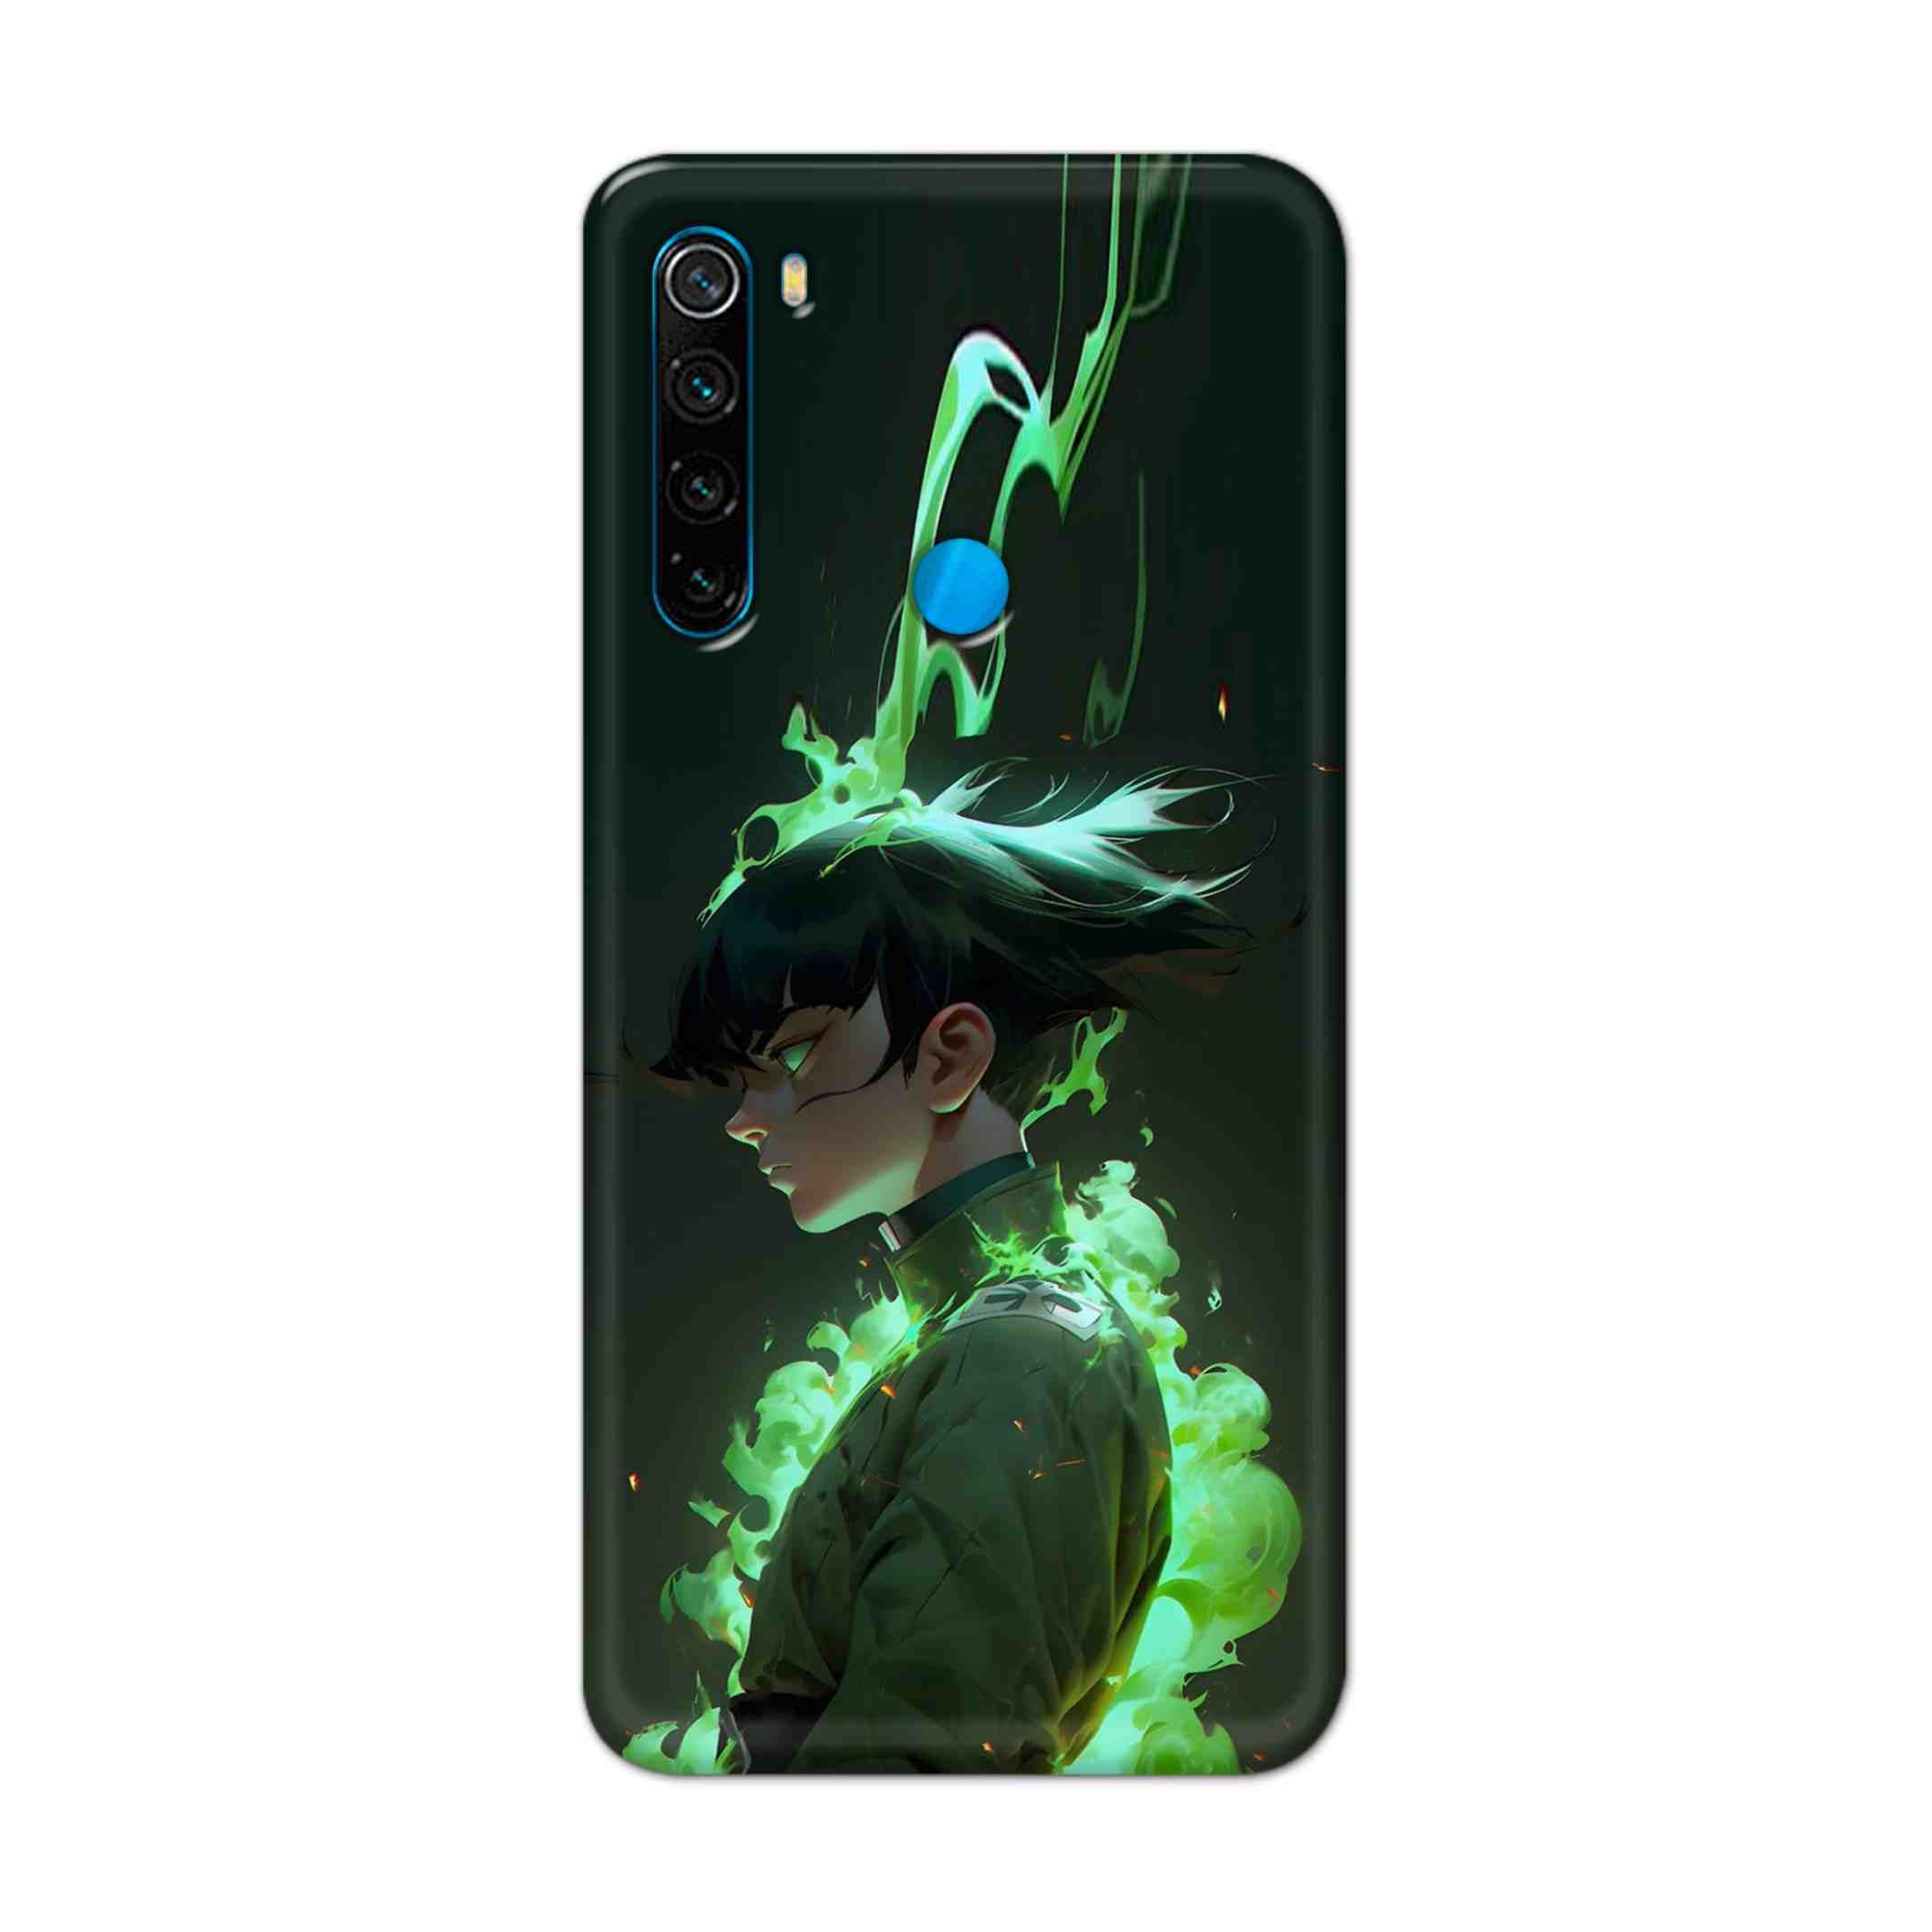 Buy Akira Hard Back Mobile Phone Case Cover For Xiaomi Redmi Note 8 Online